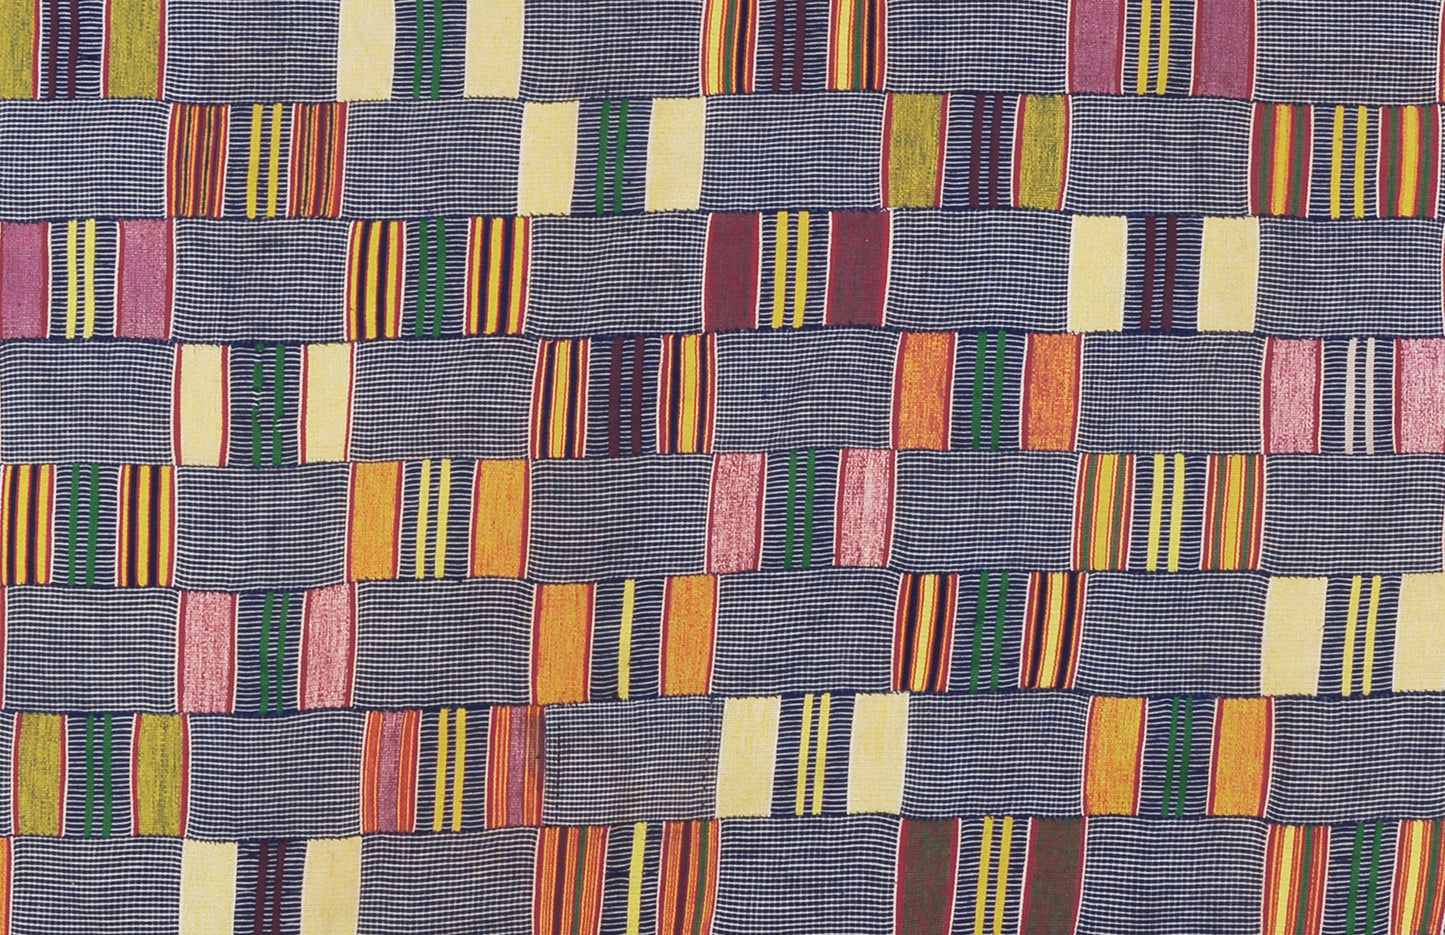 Authentic 1960s Ewe Kente Cloth from Ghana - A Tapestry of Tradition Guinea Fowl